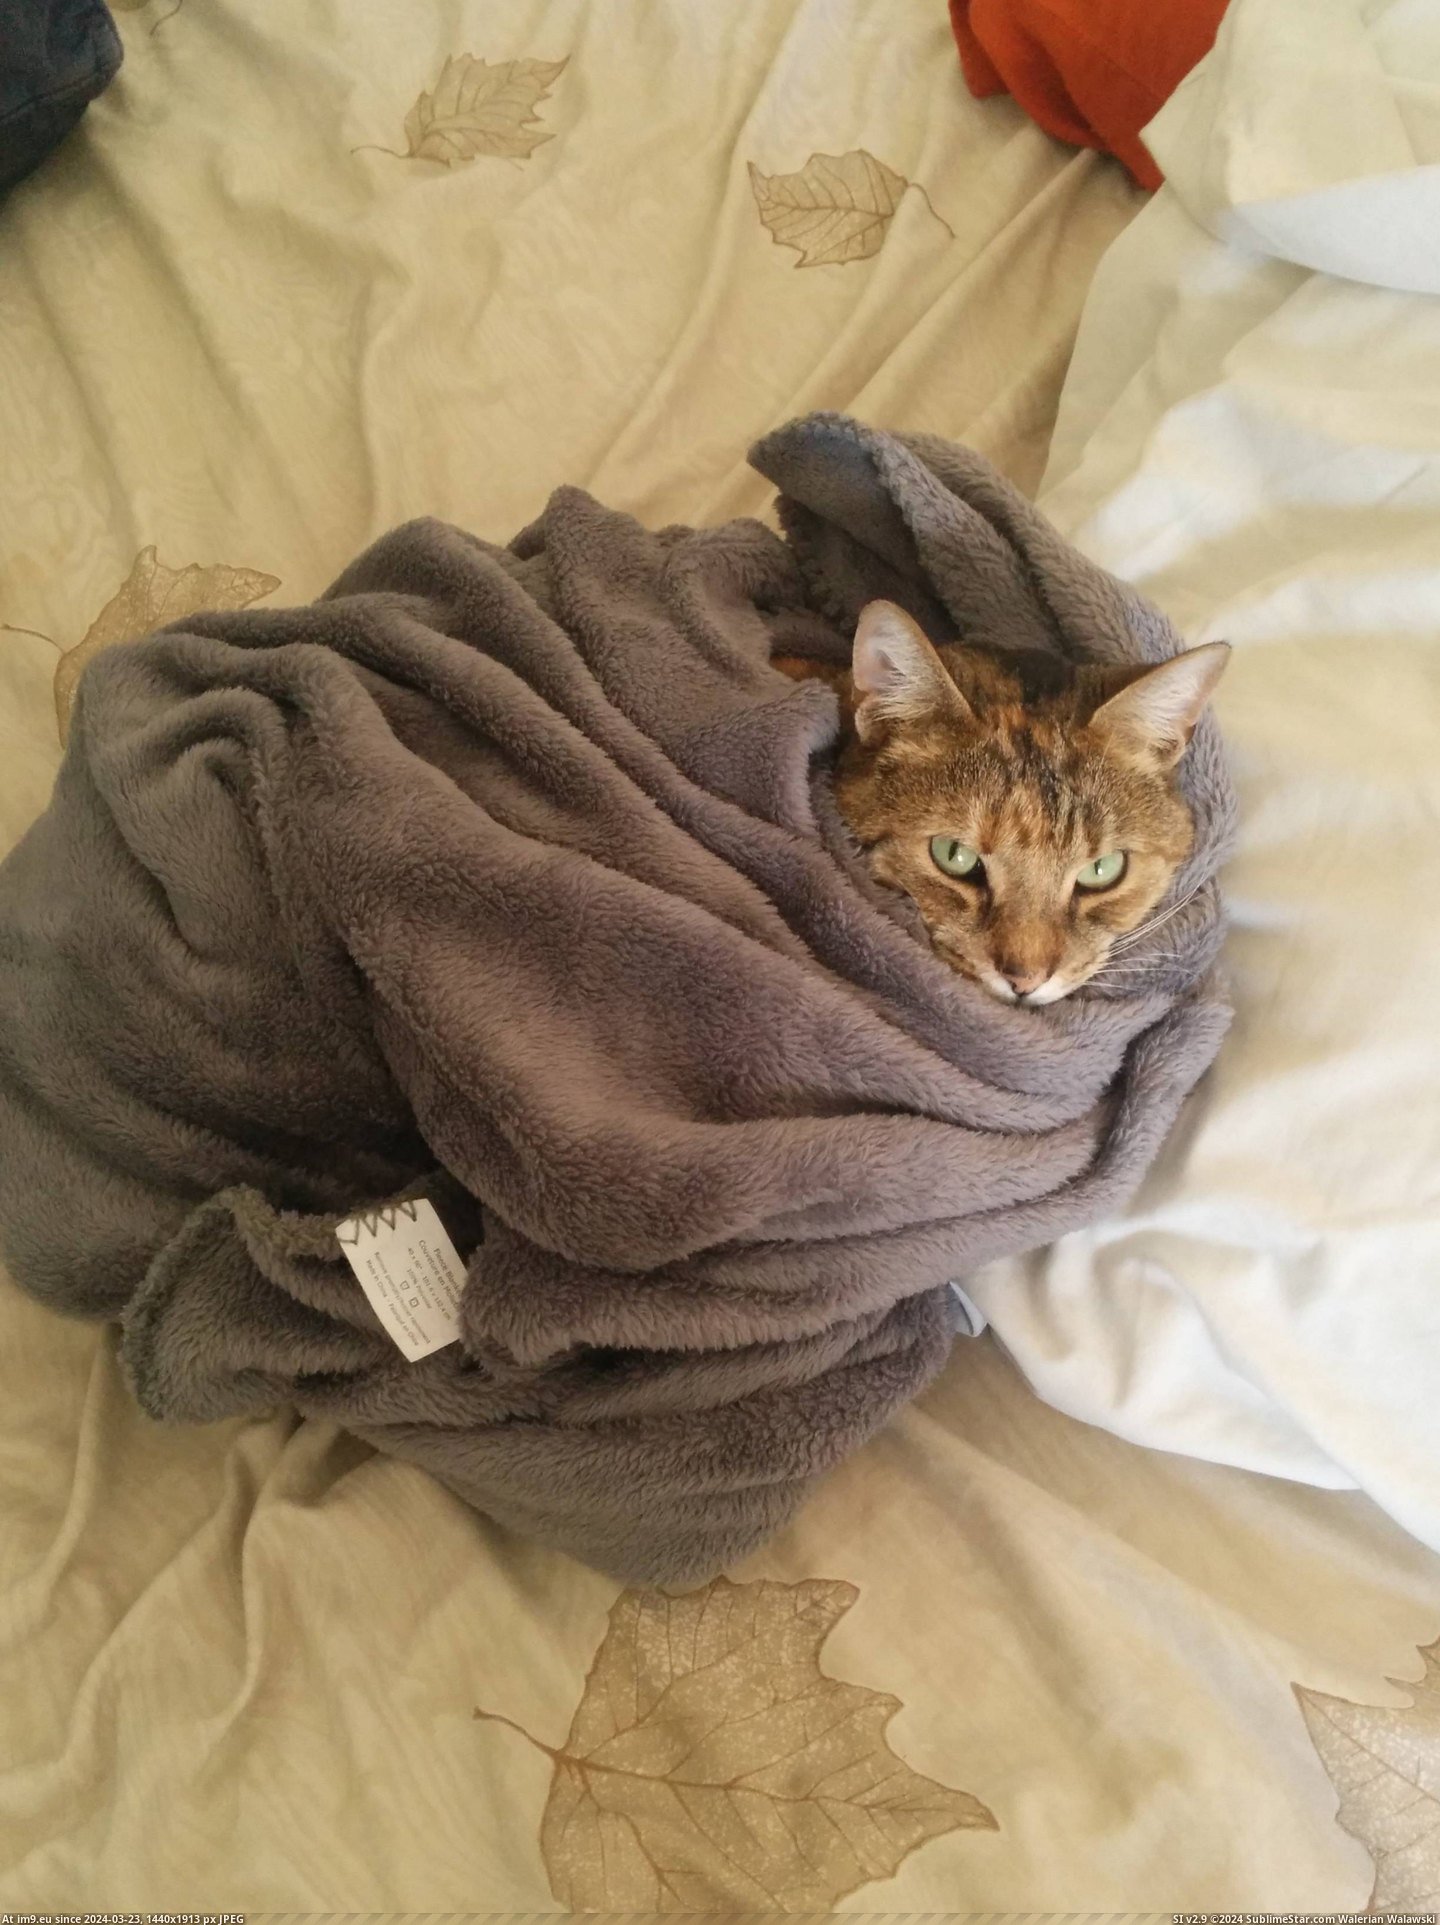 #Morning #Meows #Wrap [Aww] She meows every morning until I wrap her up Pic. (Изображение из альбом My r/AWW favs))